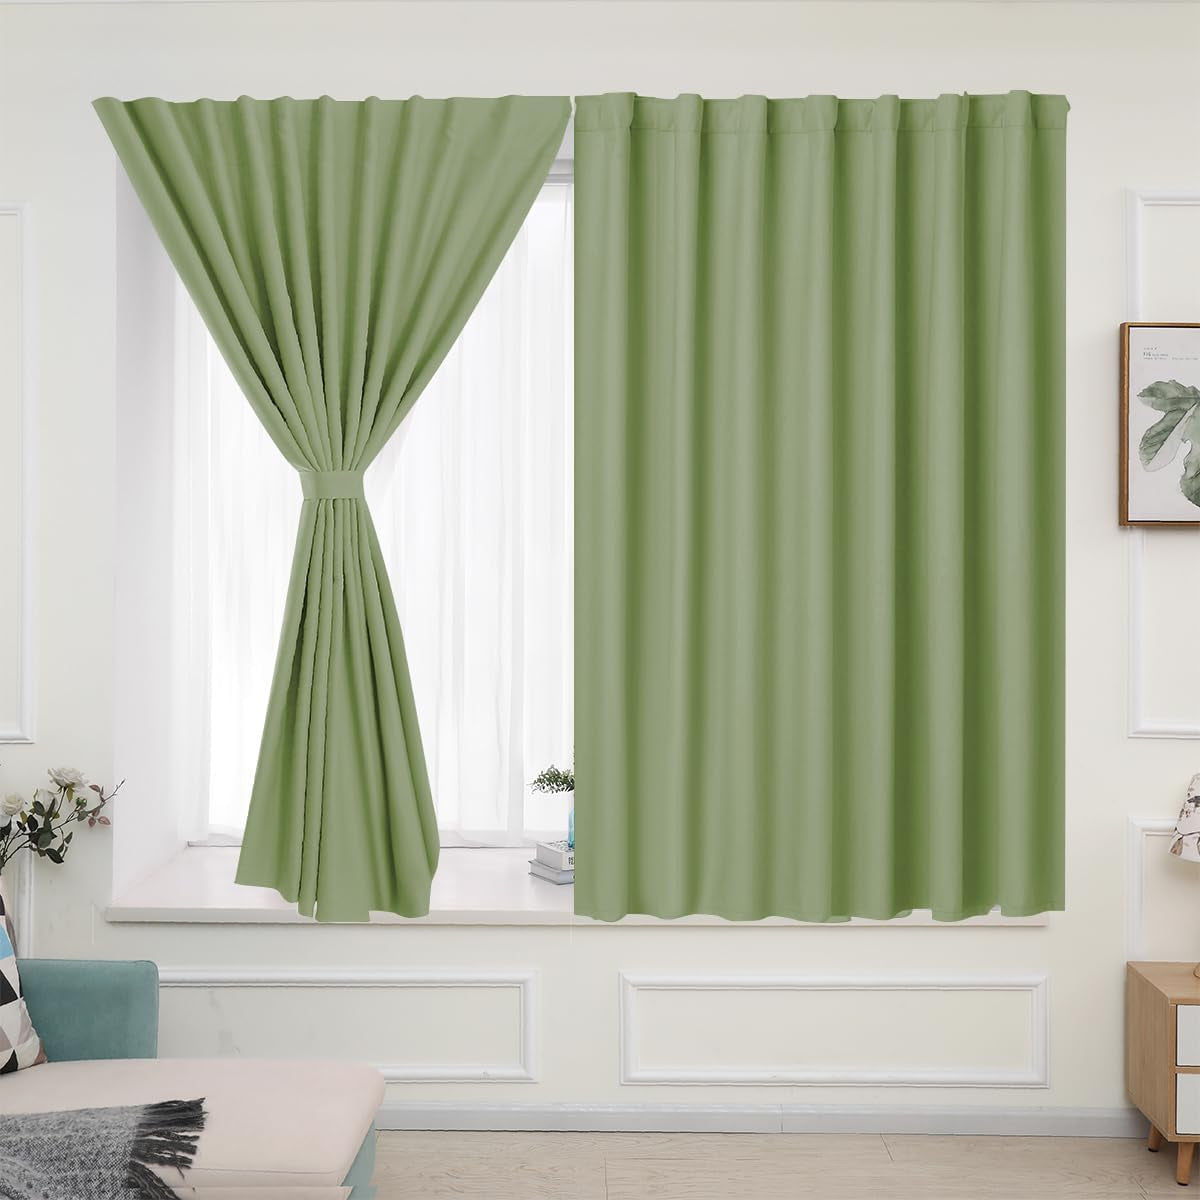 Muamar 2Pcs Blackout Curtains Privacy Curtains 63 Inch Length Window Curtains,Easy Install Thermal Insulated Window Shades,Stick Curtains No Rods, Black 42" W X 63" L  Muamar Sage Green 42"W X 63"L 